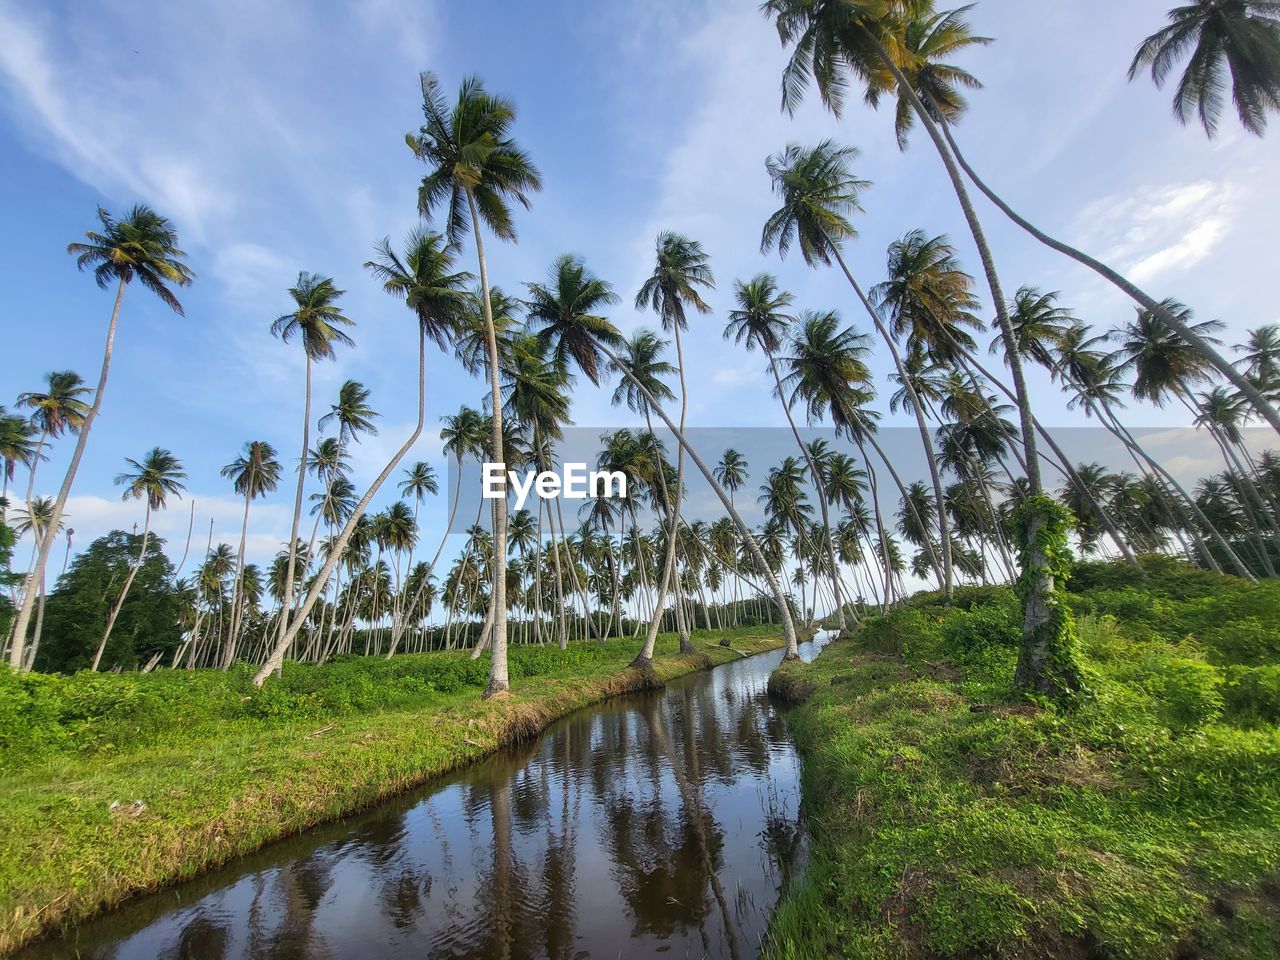 palm tree, tropical climate, plant, tree, water, sky, nature, coconut palm tree, land, environment, beauty in nature, landscape, scenics - nature, tranquility, cloud, no people, growth, tropical tree, tranquil scene, tropics, reflection, outdoors, travel destinations, green, travel, field, non-urban scene, rice paddy, agriculture, grass, day, beach, rural scene, vegetation, flower, idyllic, tourism, rice, vacation, wetland, trip, lake, paddy field, body of water, environmental conservation